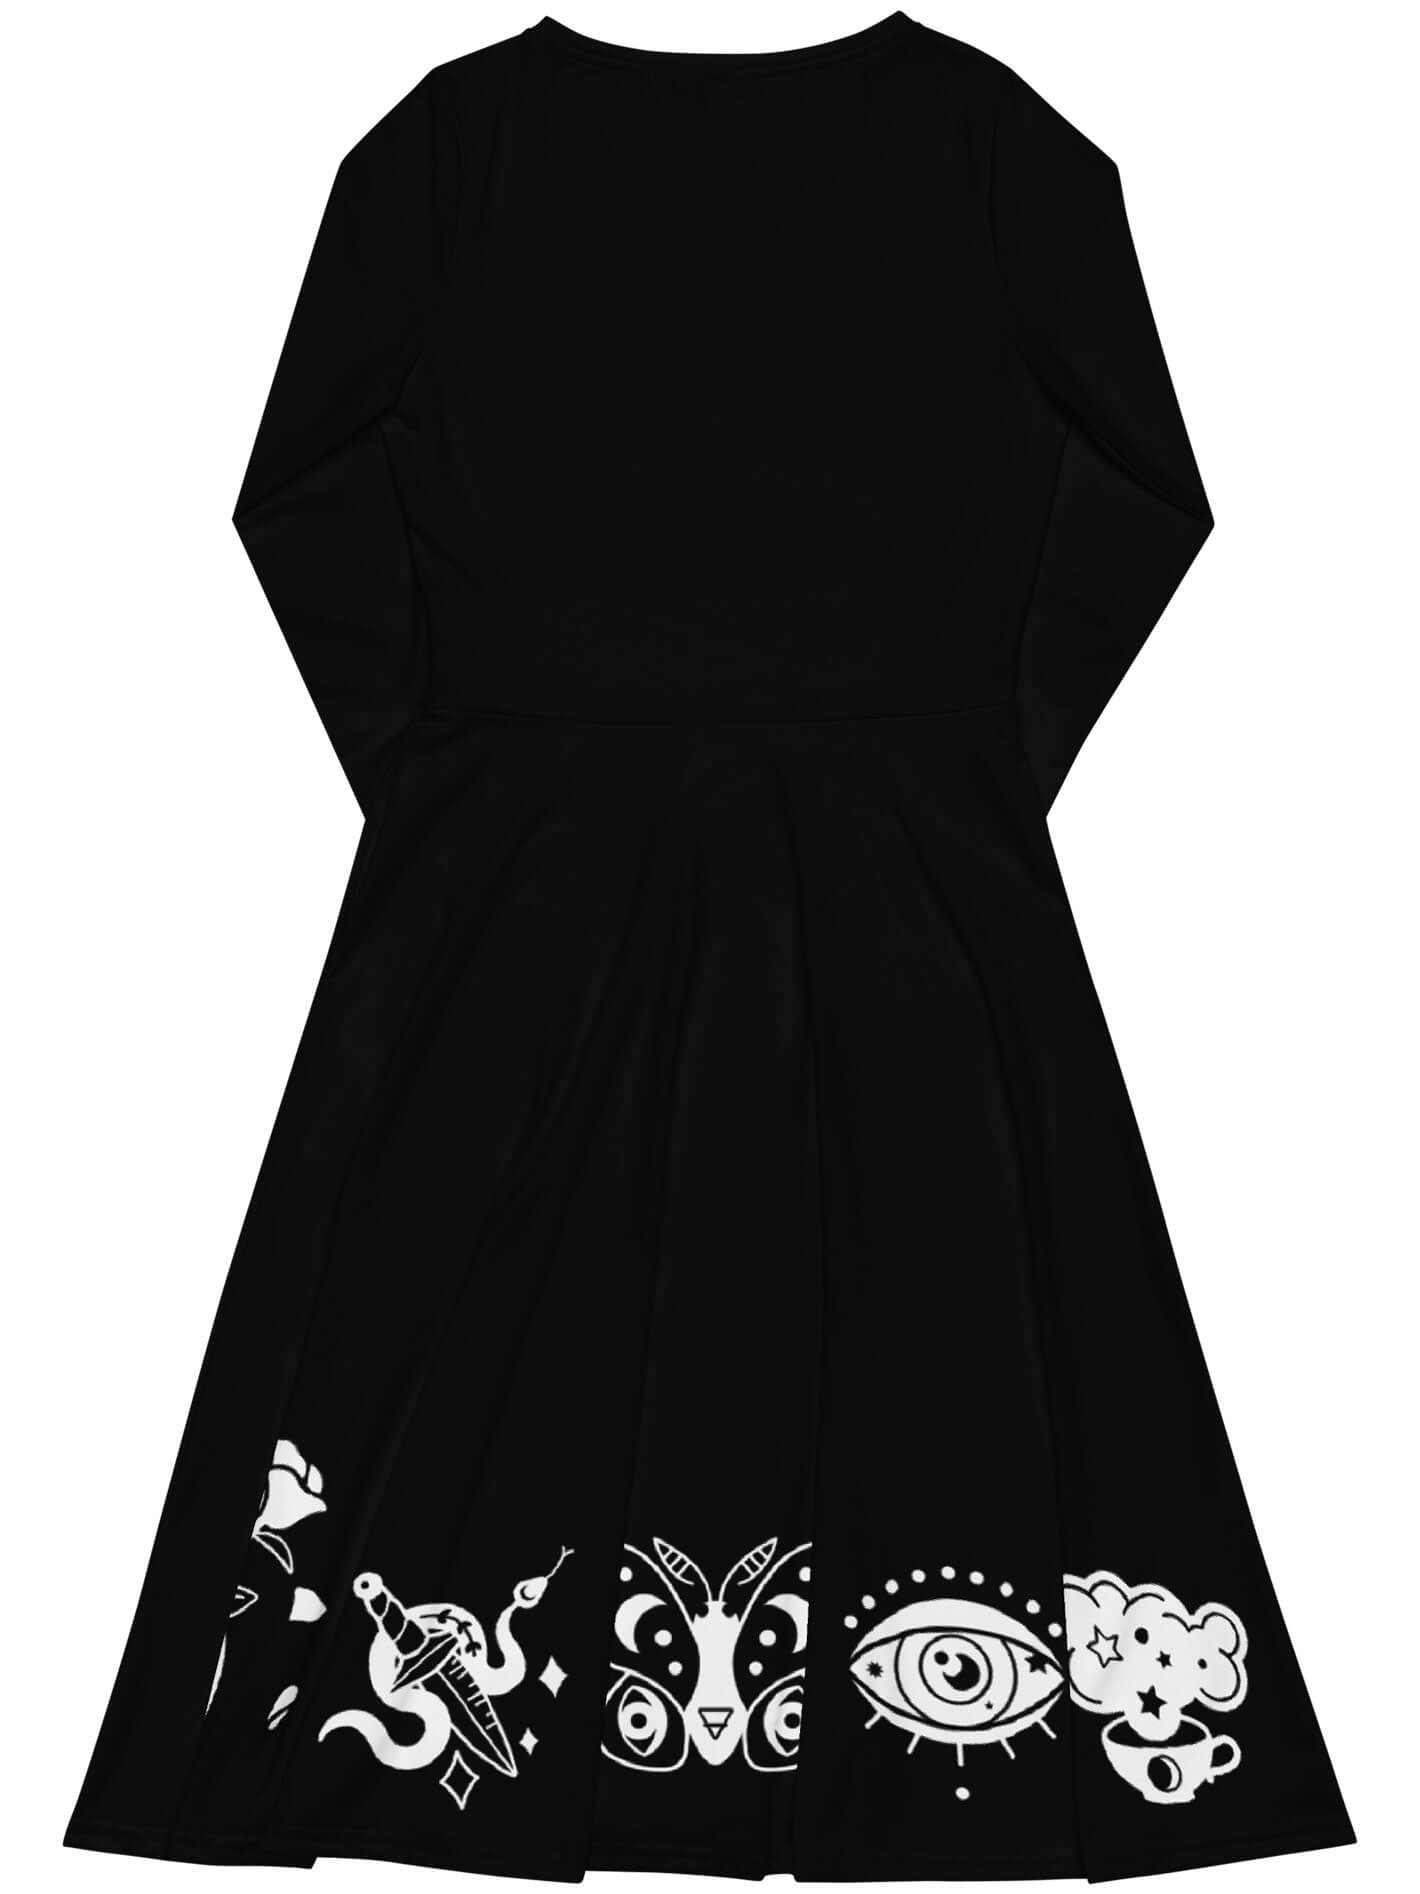 Plus size witch long sleeve fall dress.